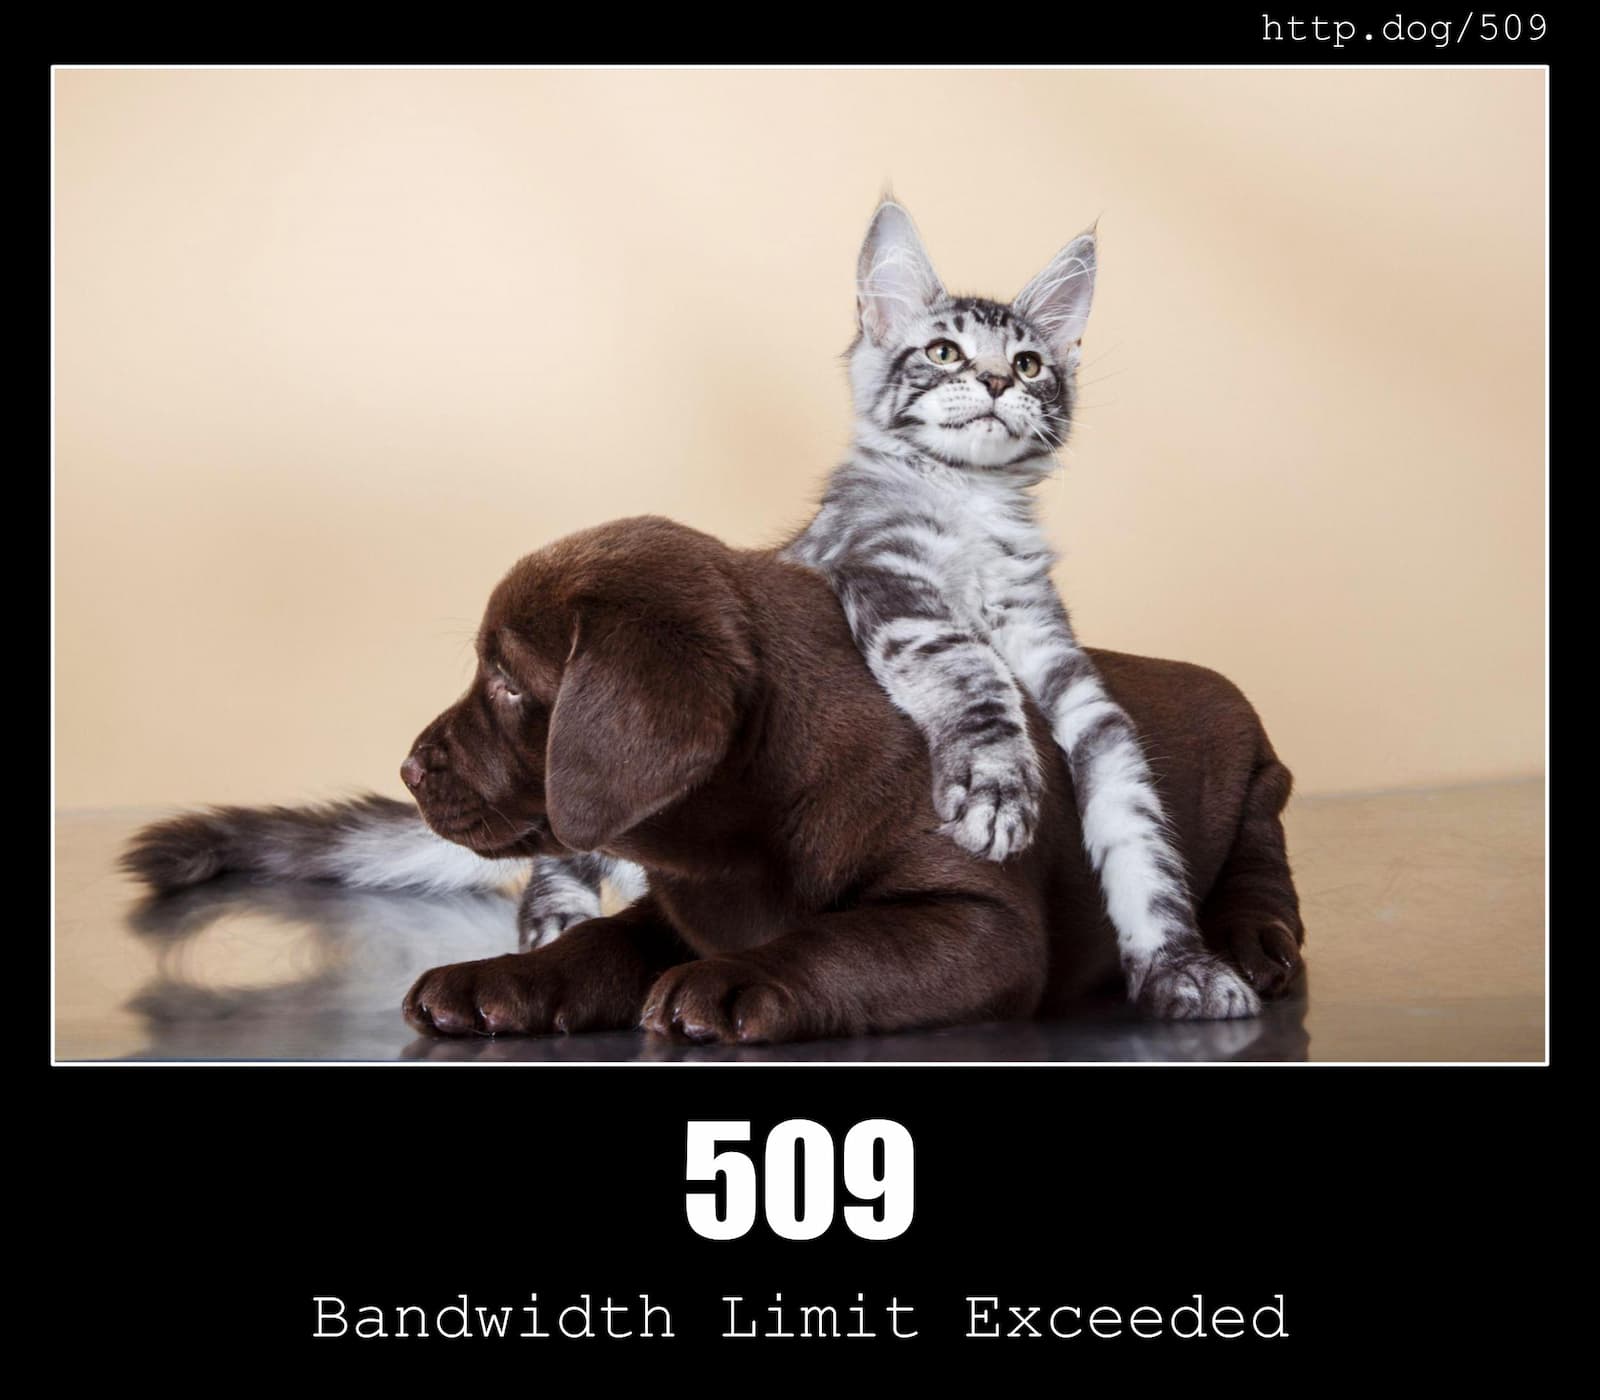 HTTP Status Code 509 Bandwidth Limit Exceeded & Dogs